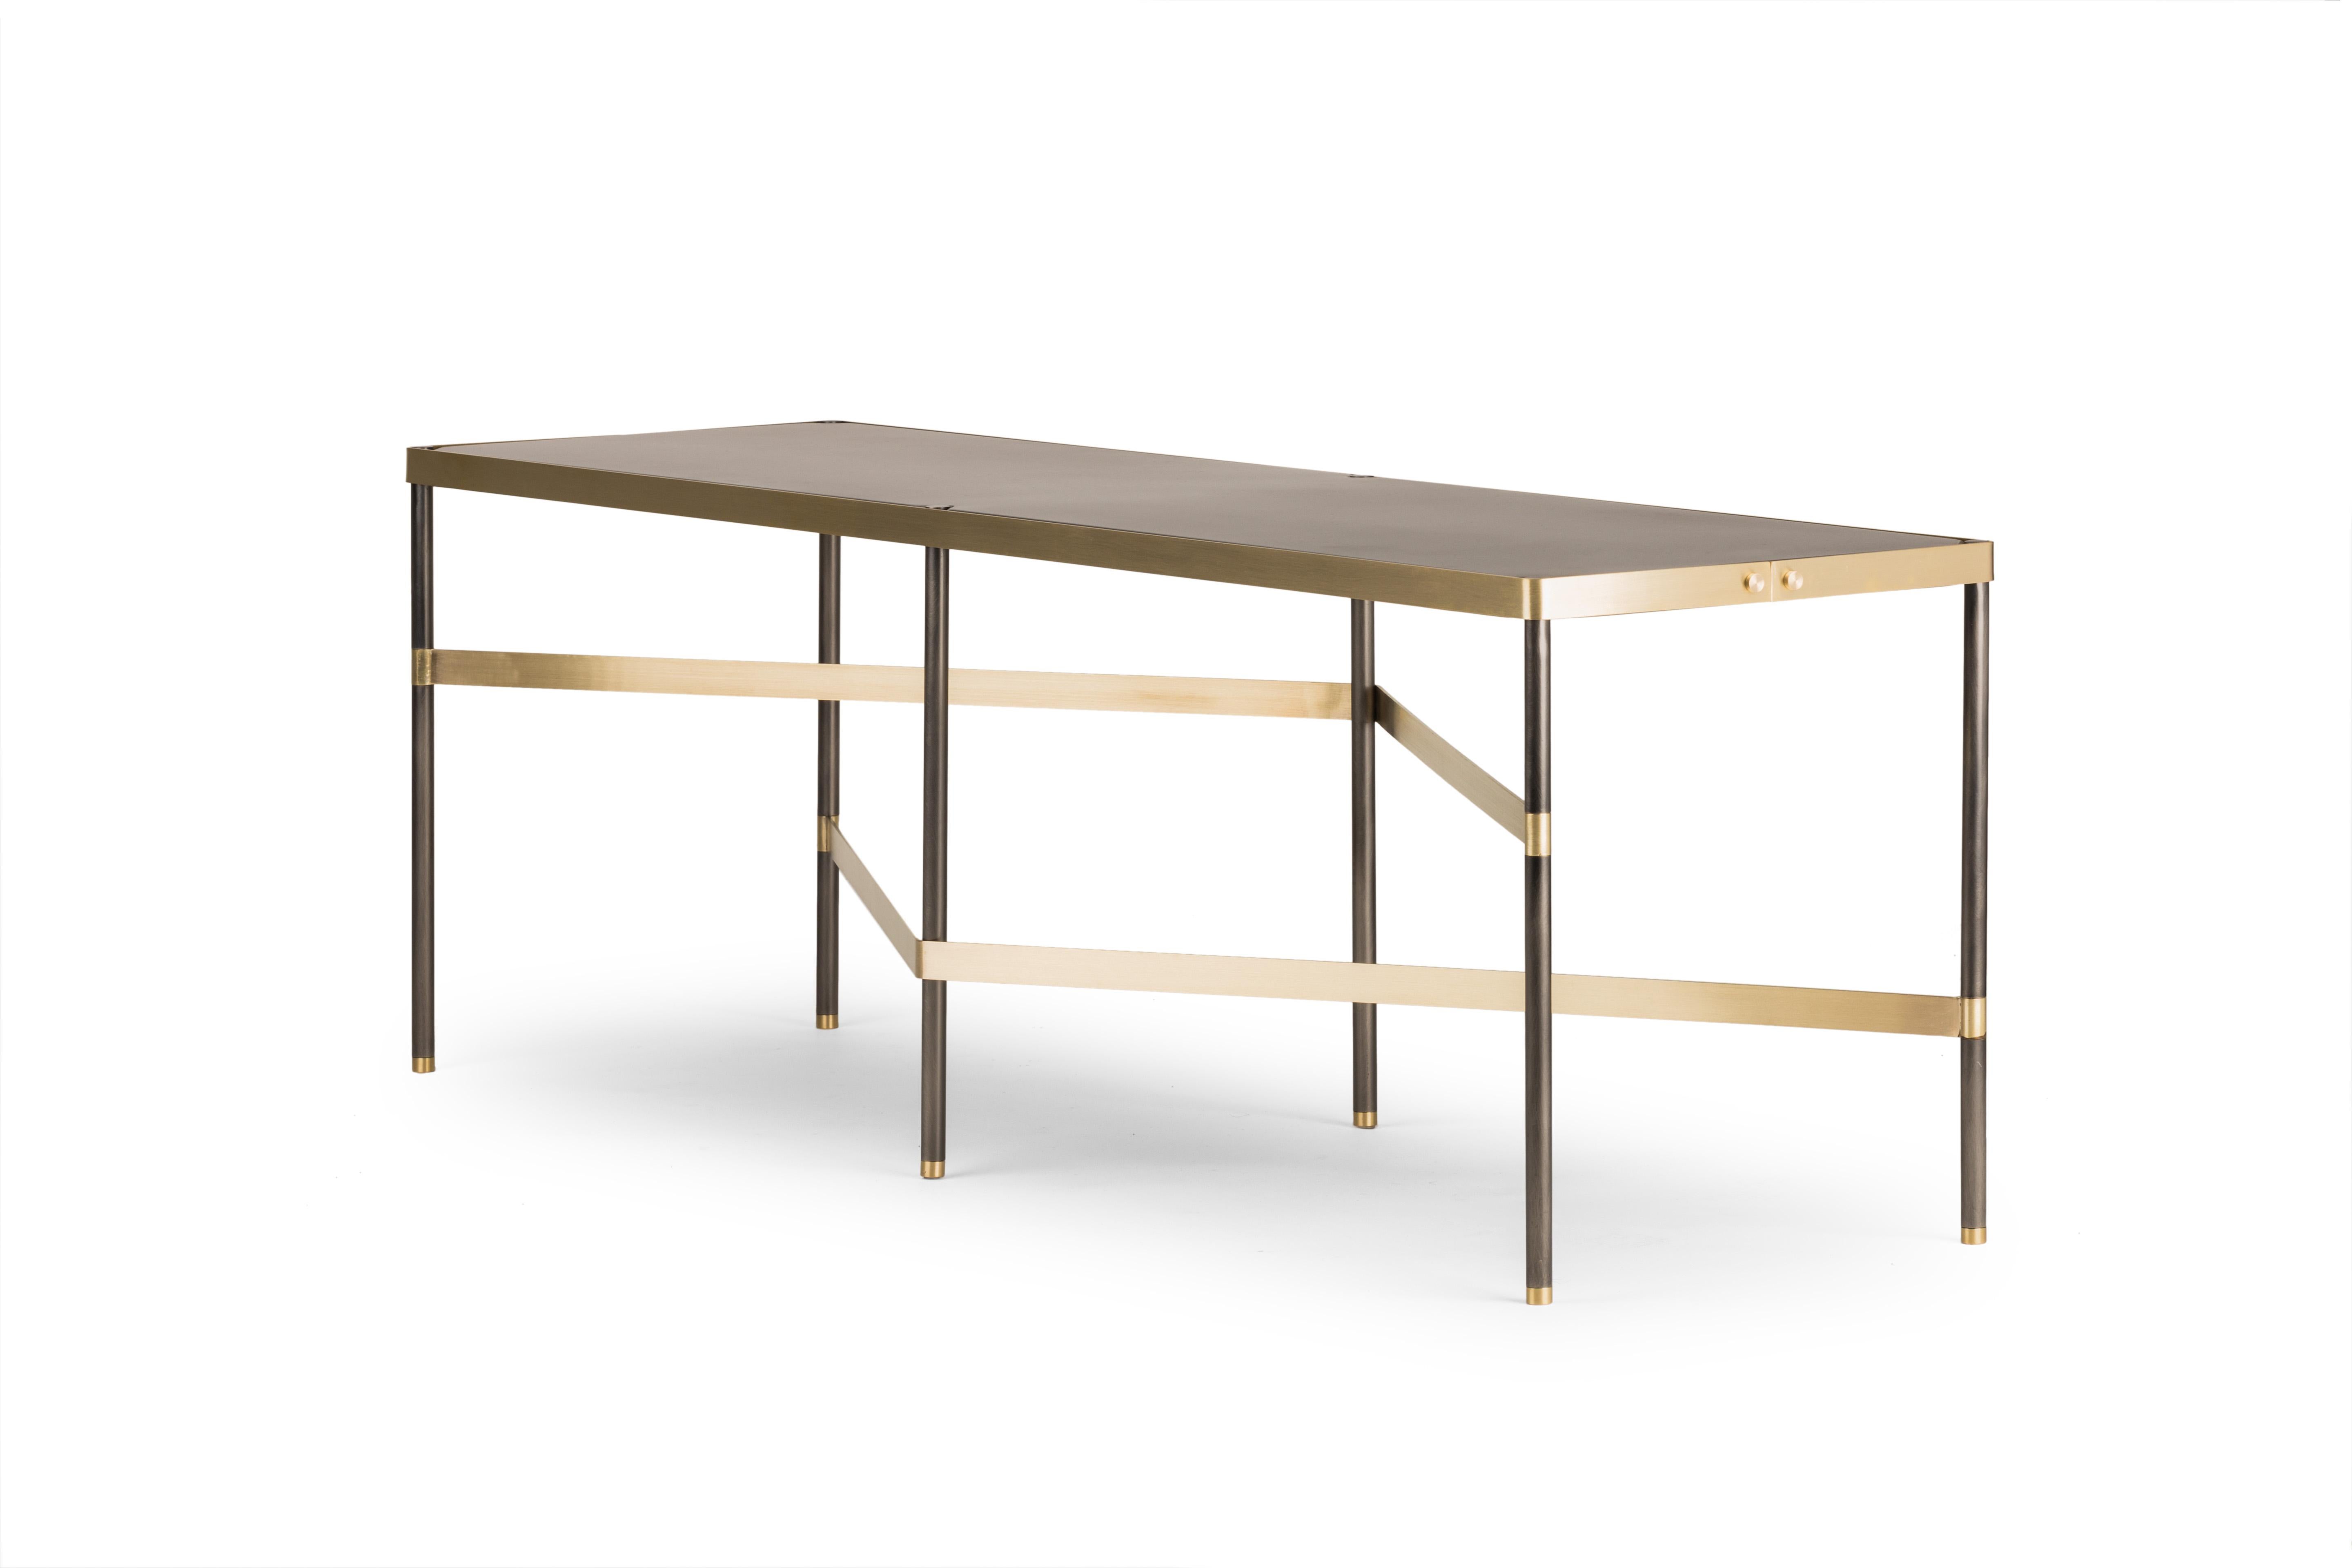 Twine bench by Mingardo
Dimensions: D130 x W36.5 x H44 cm 
Materials: Burnished iron and natural brass
Weight: 13 kg

Also Available in different finishes.

Twine is a small bench whose six legs are tied together by two brass strips